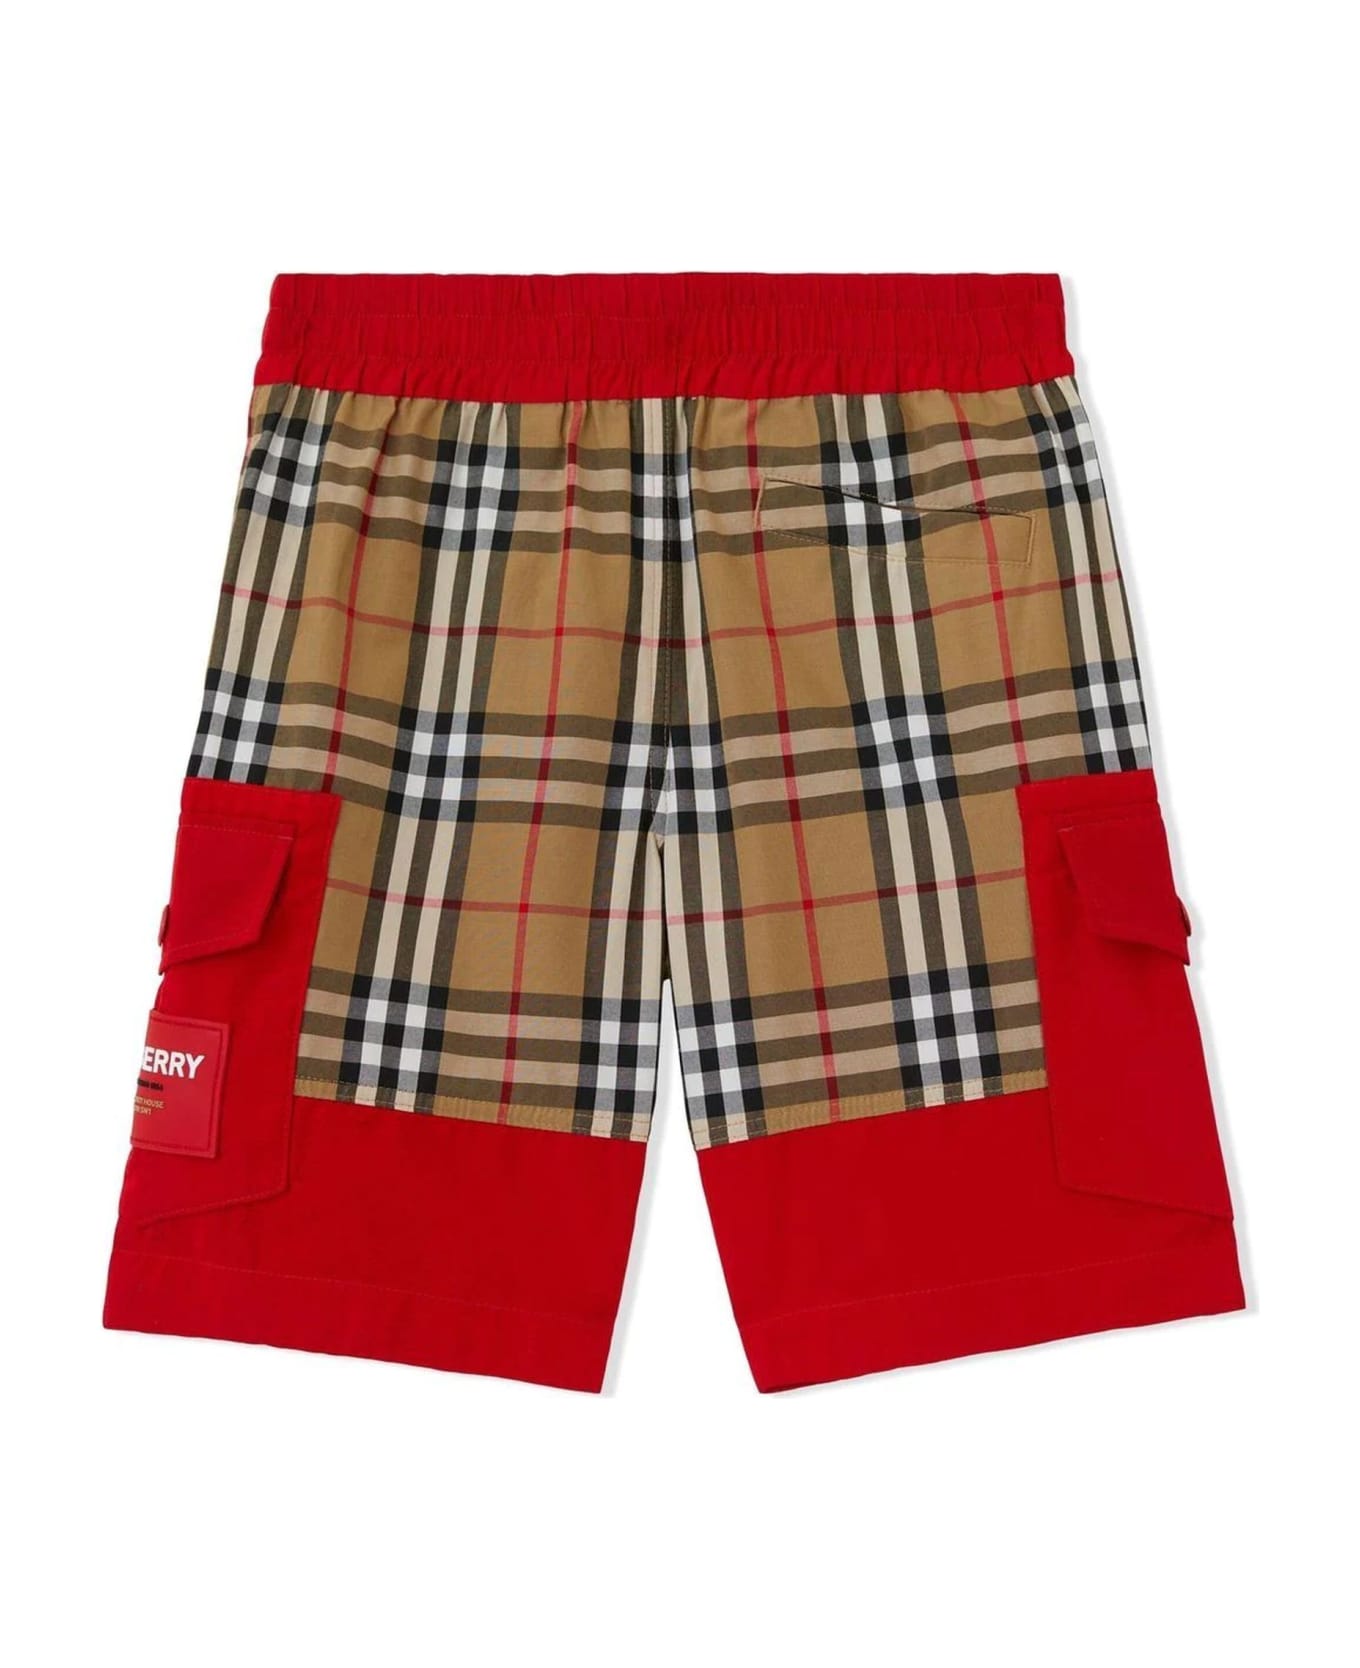 Burberry Kids Shorts Red - Red